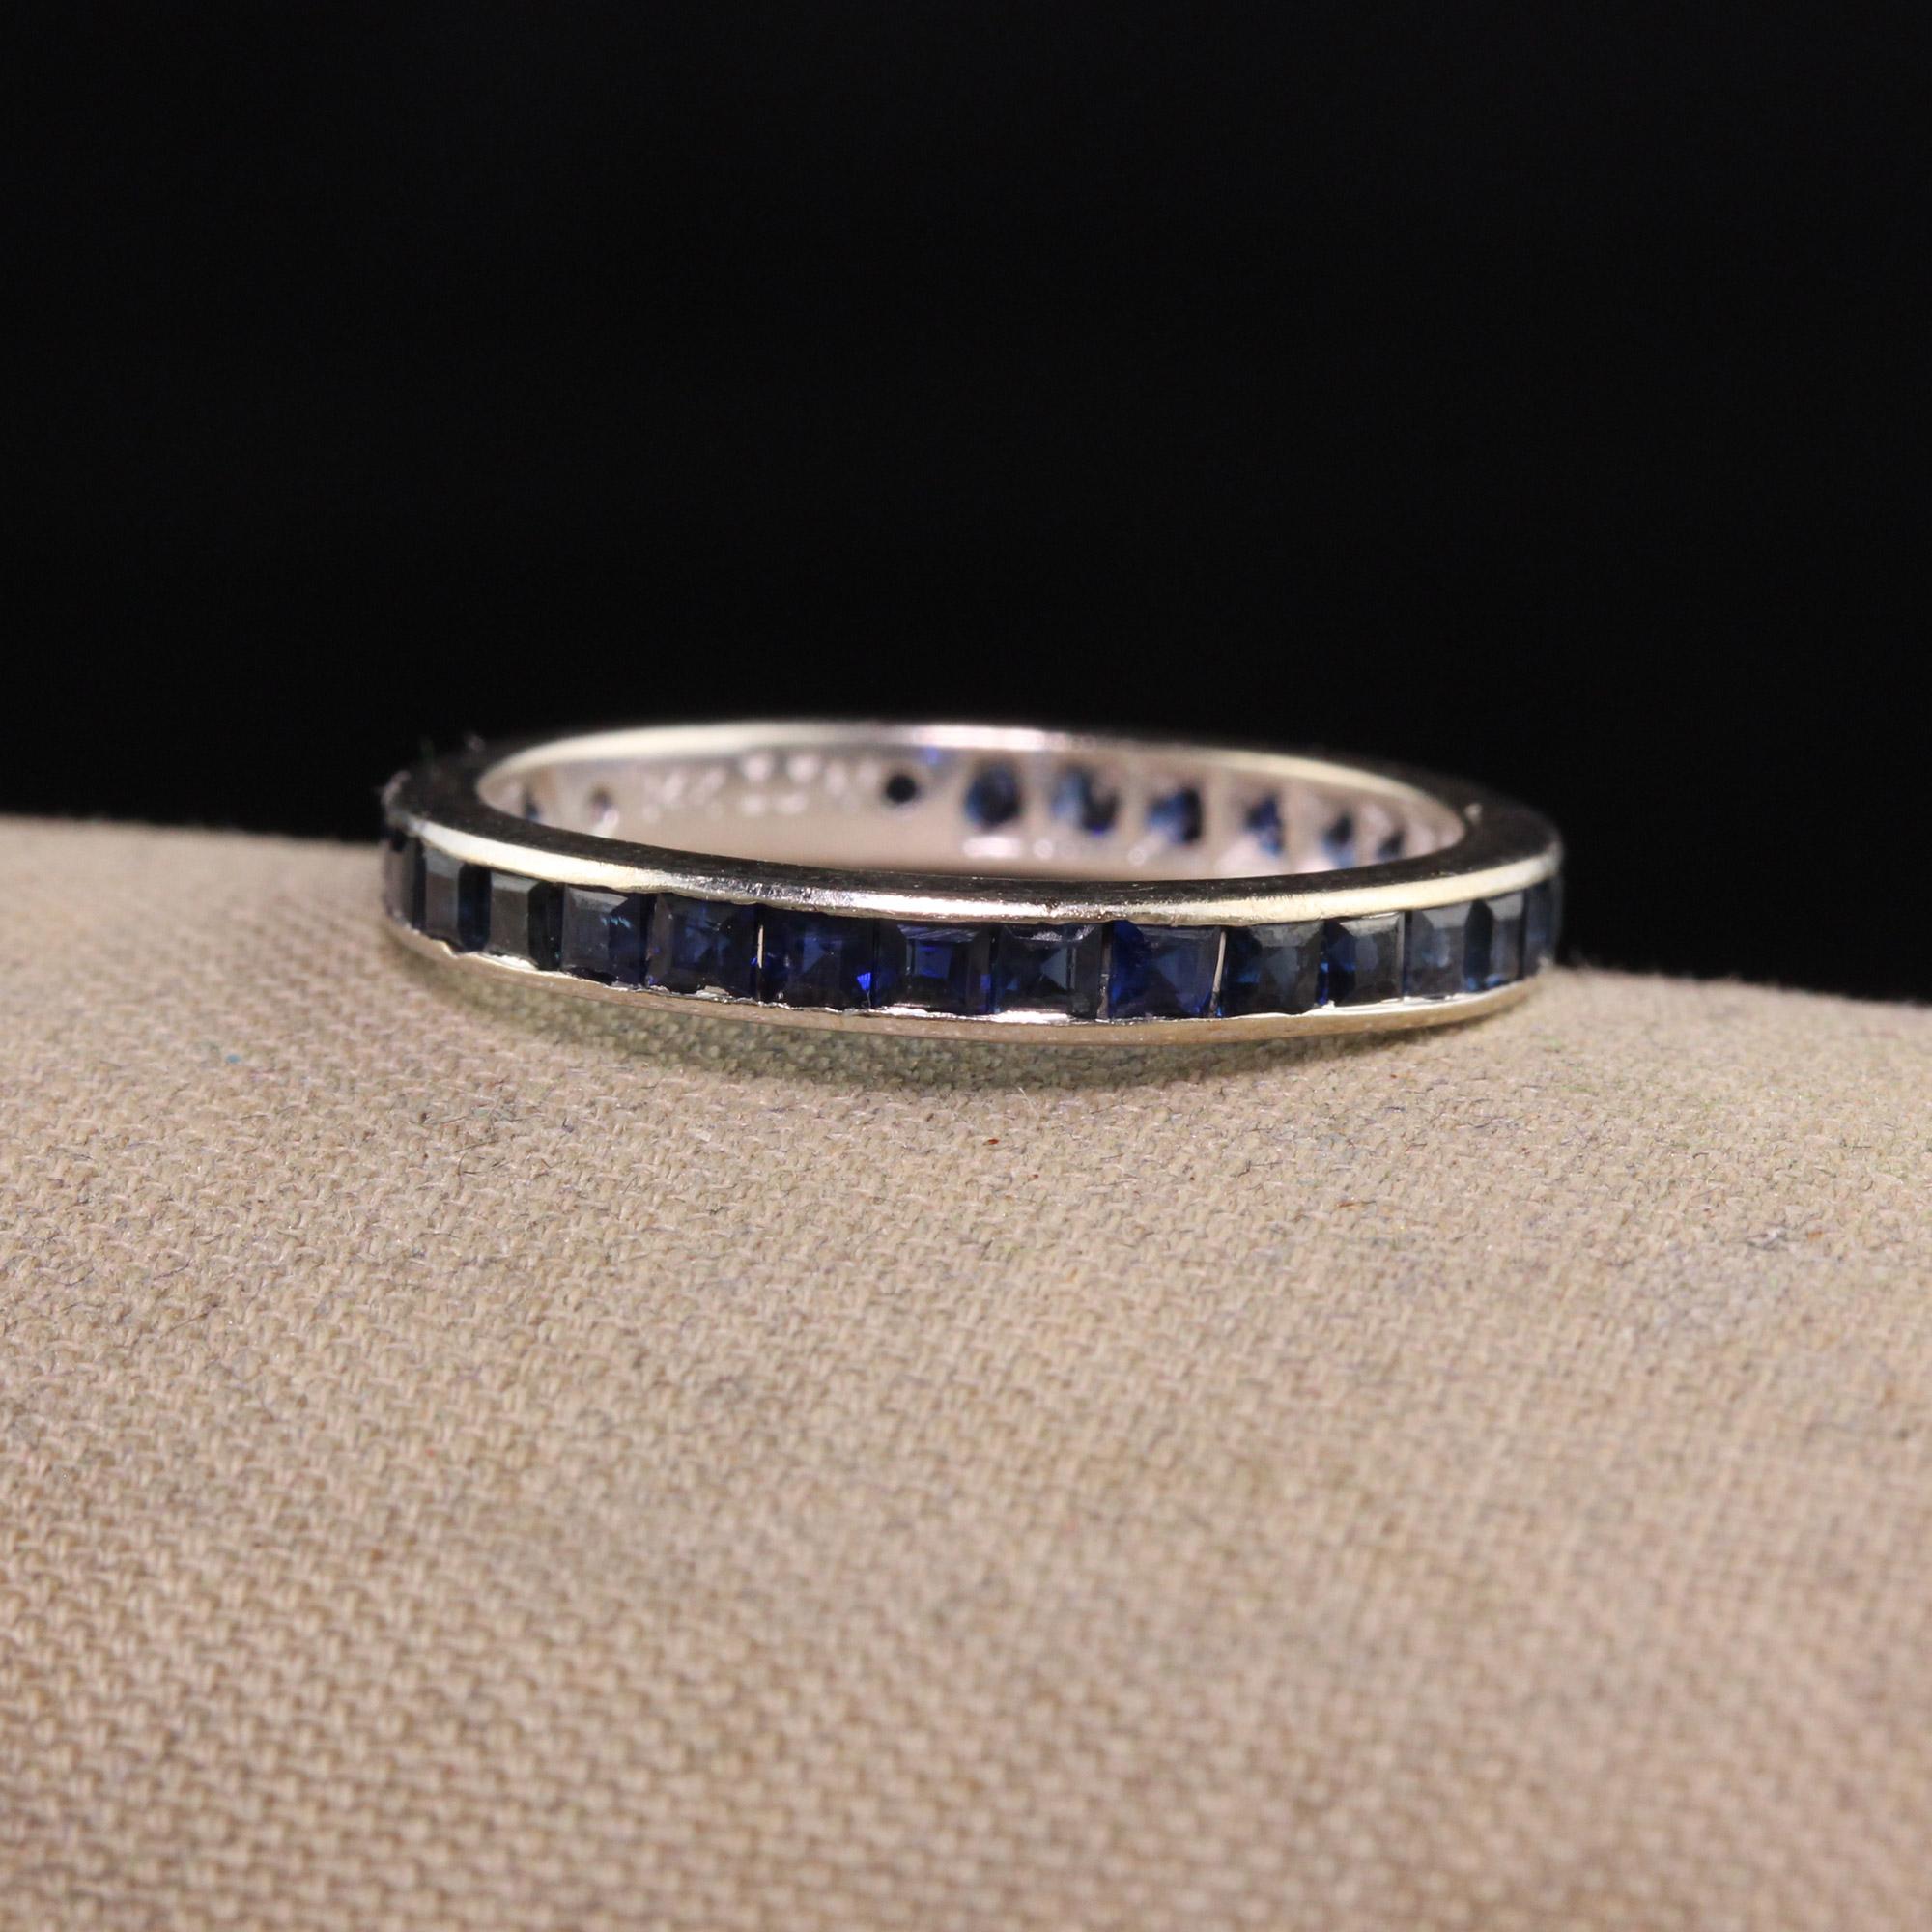 Beautiful Vintage Estate 14K White Gold Square Cut Sapphire Eternity Wedding Band. This wedding band is crafted in 14K white gold and has square cut blue sapphires going around the entire band.

Item #R1158

Metal: 14K White Gold

Weight: 1.5